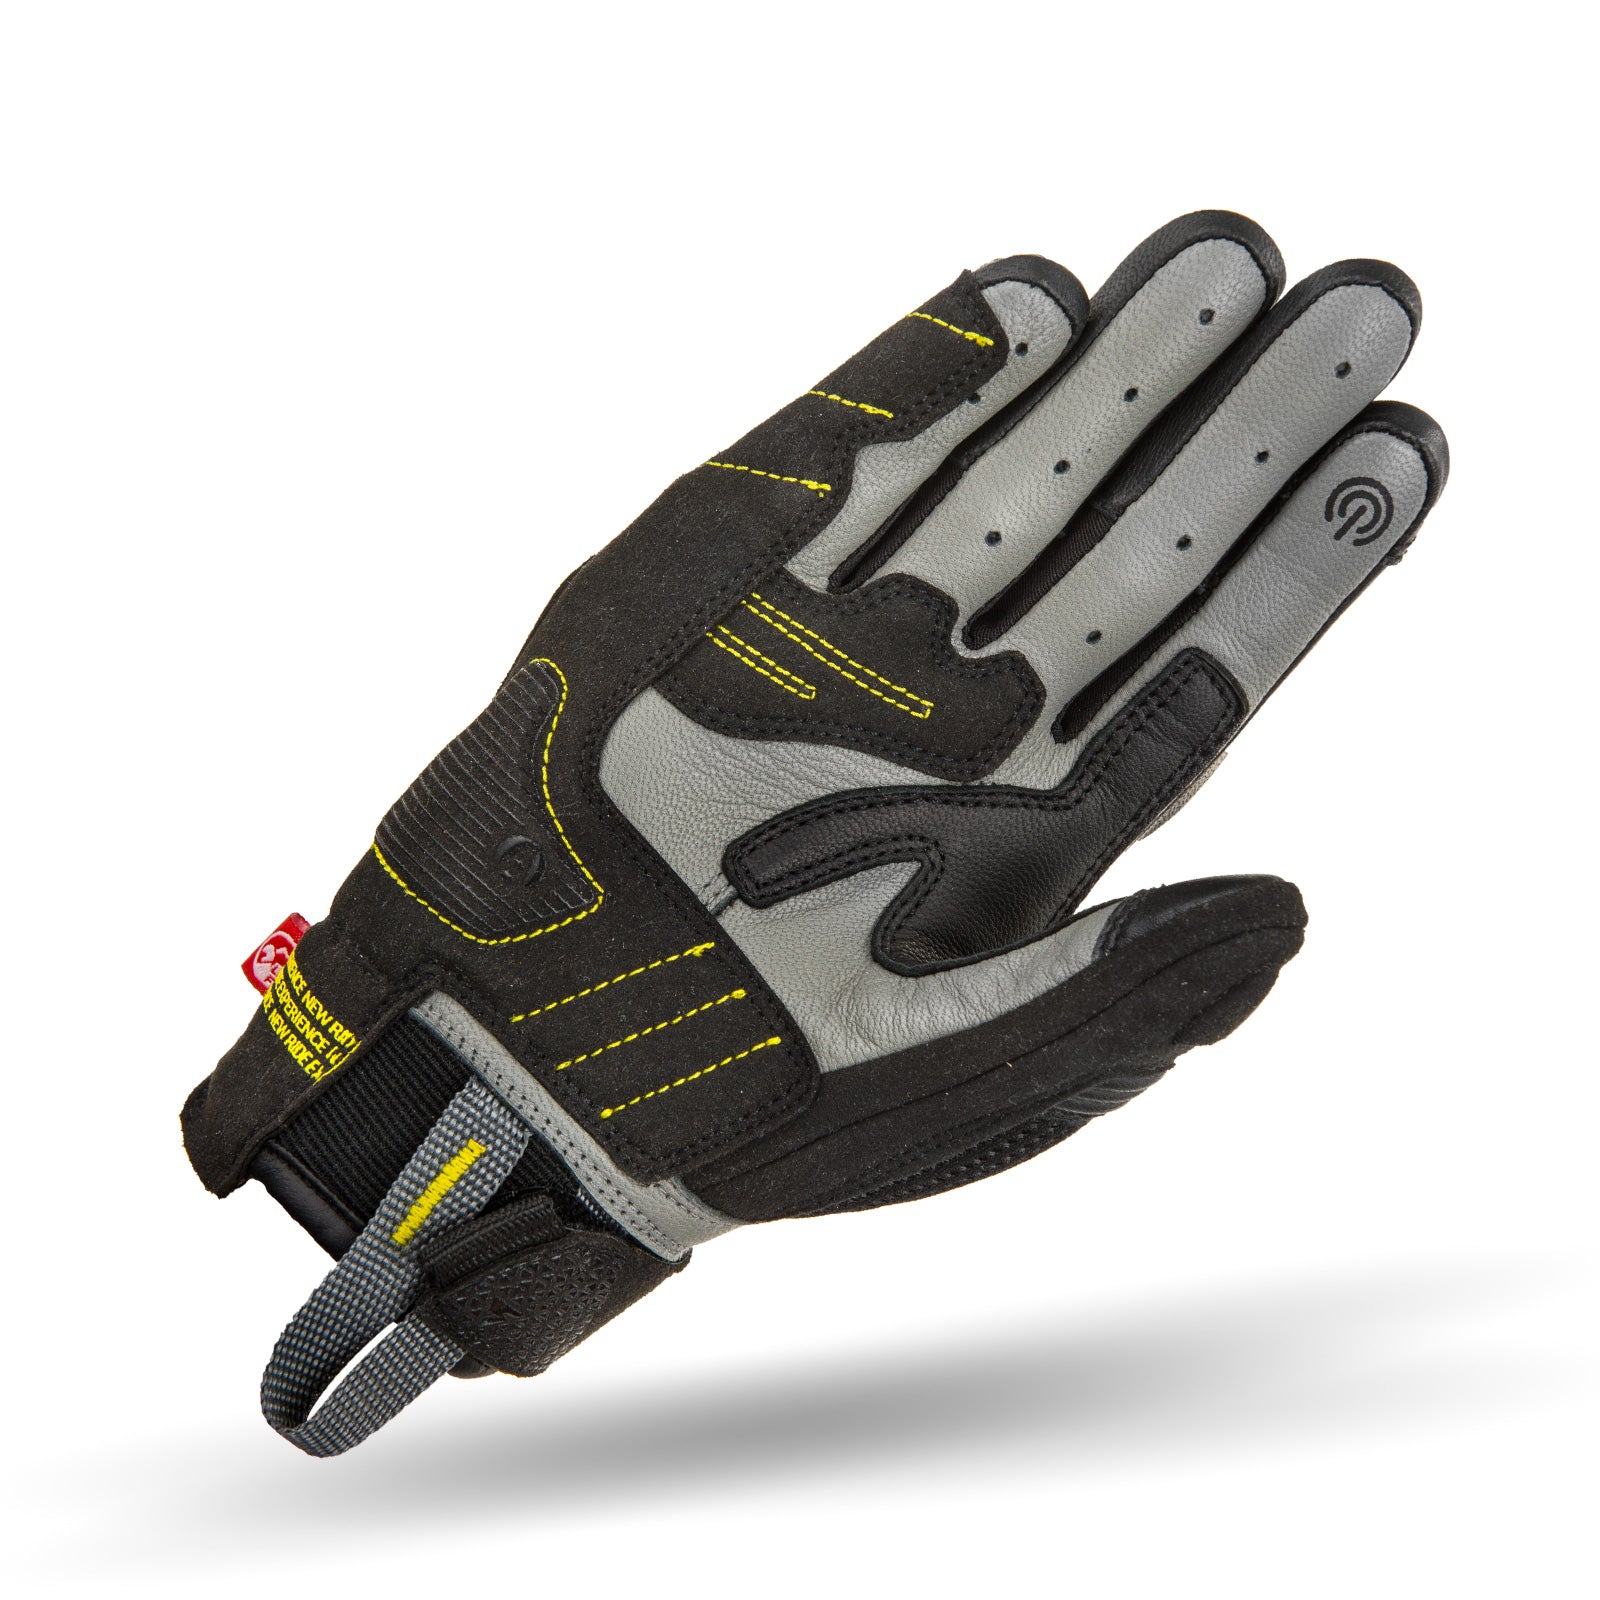 Black female motorcycle glove from Shima with grey details